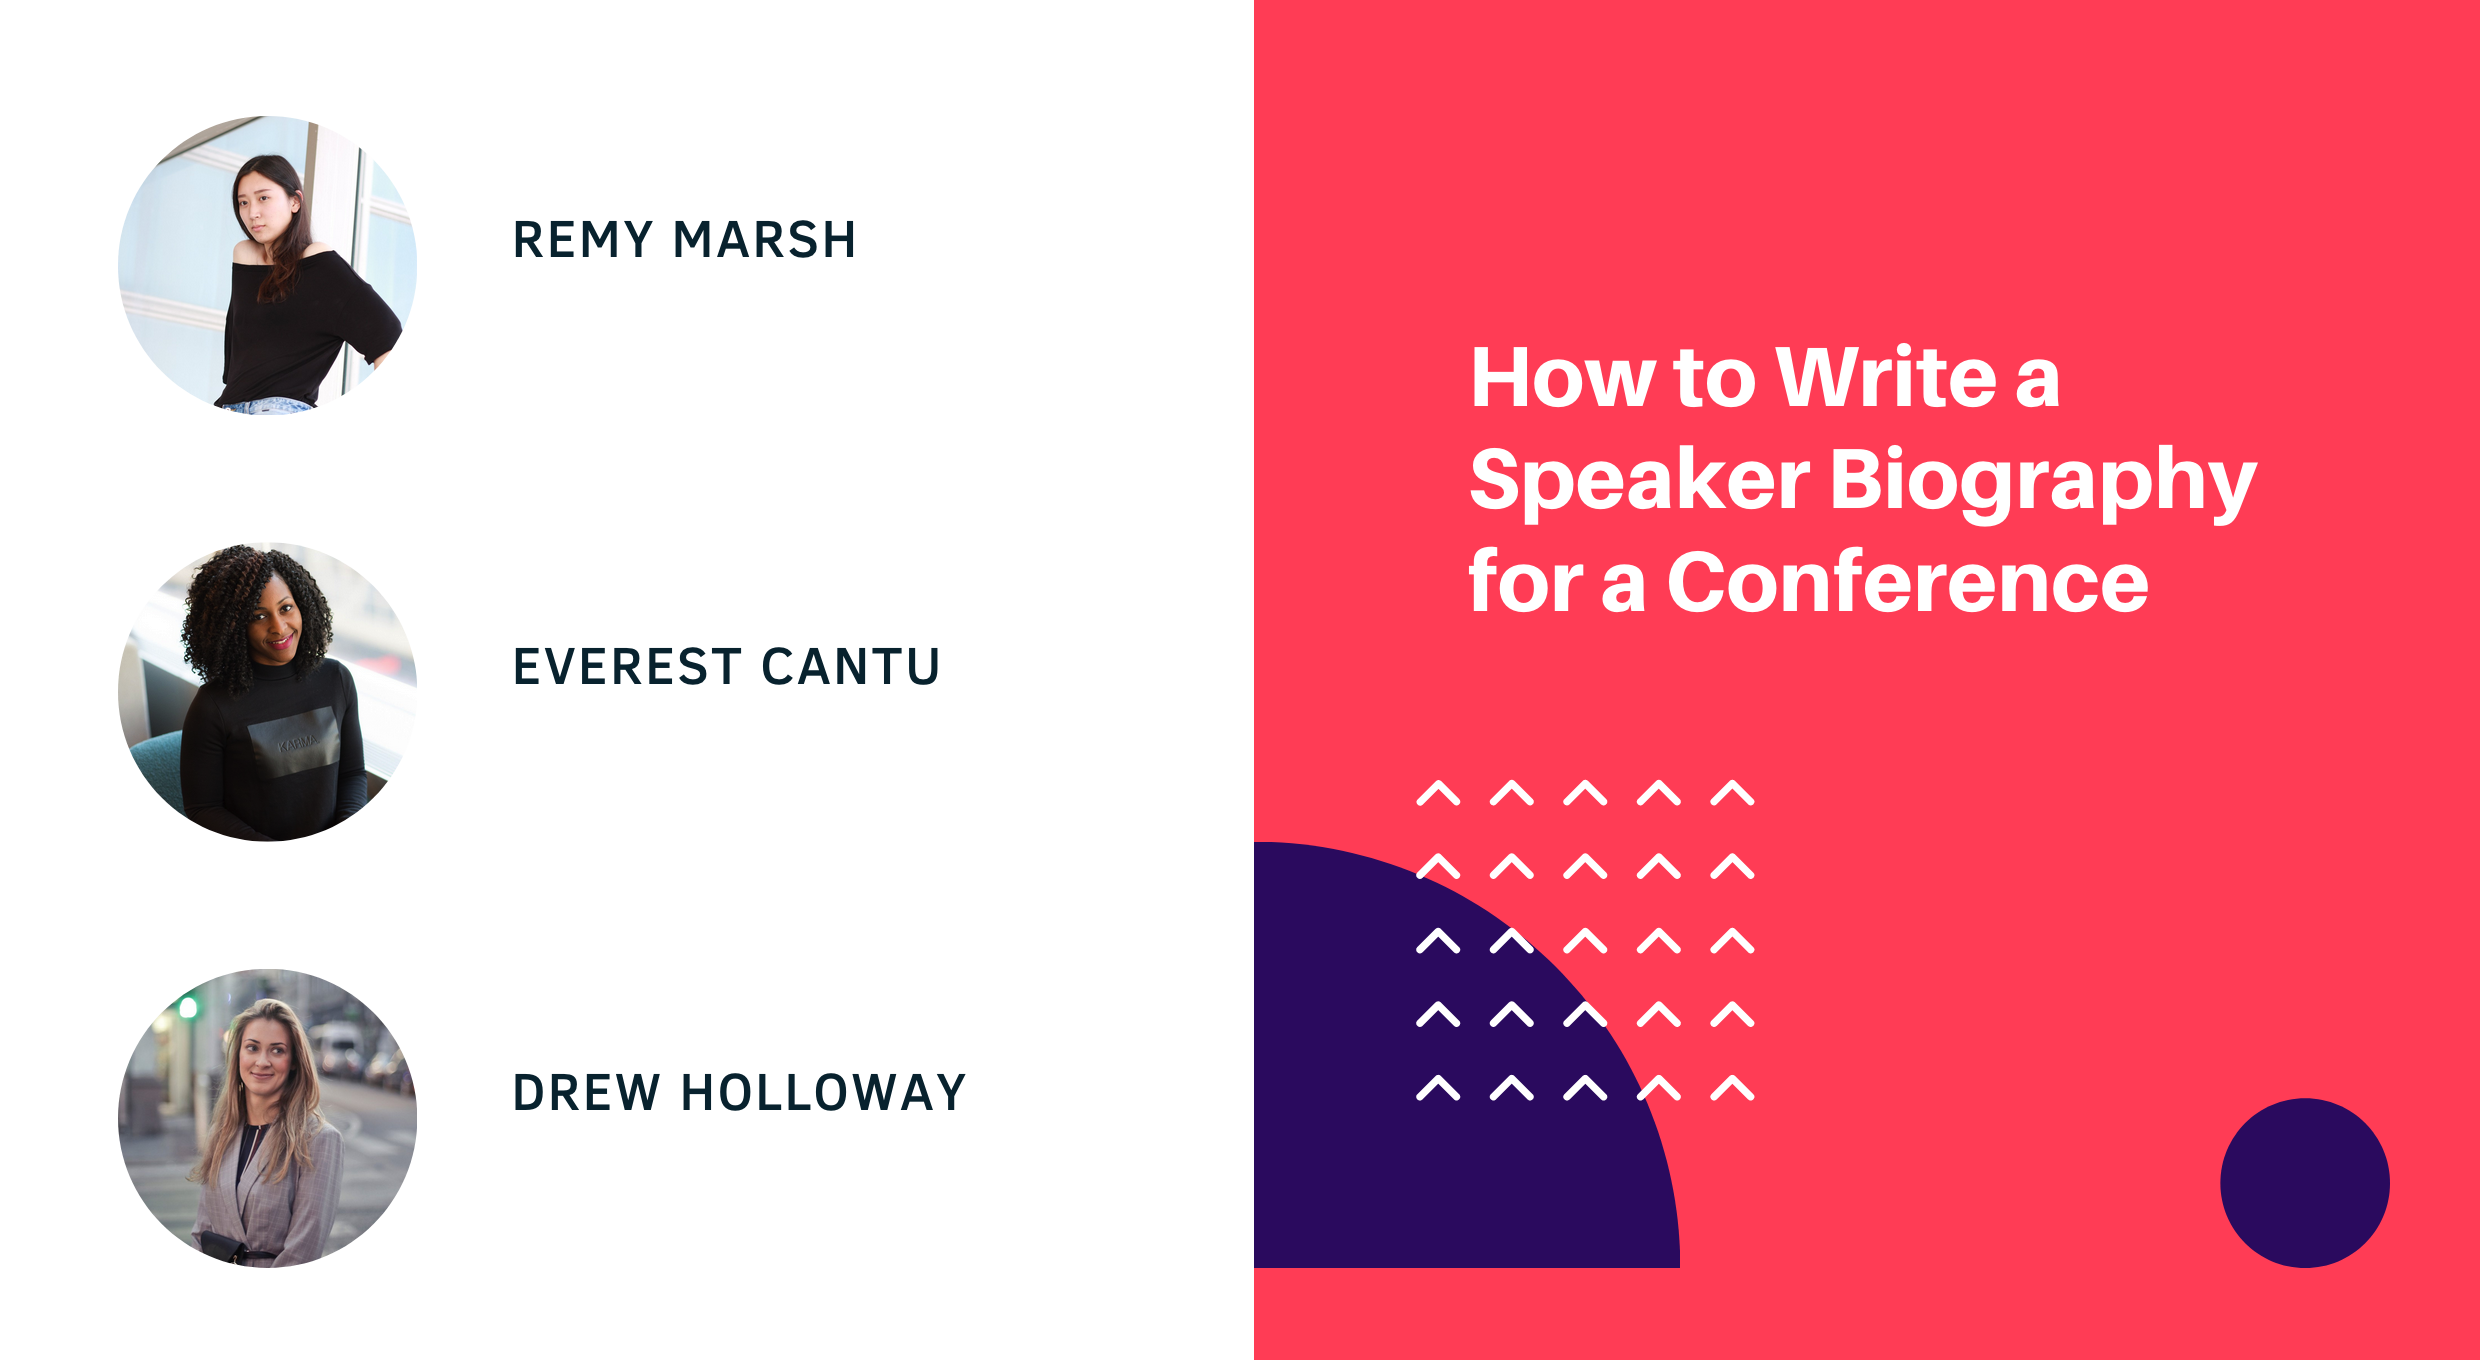 How to Write a Speaker Biography for a Conference